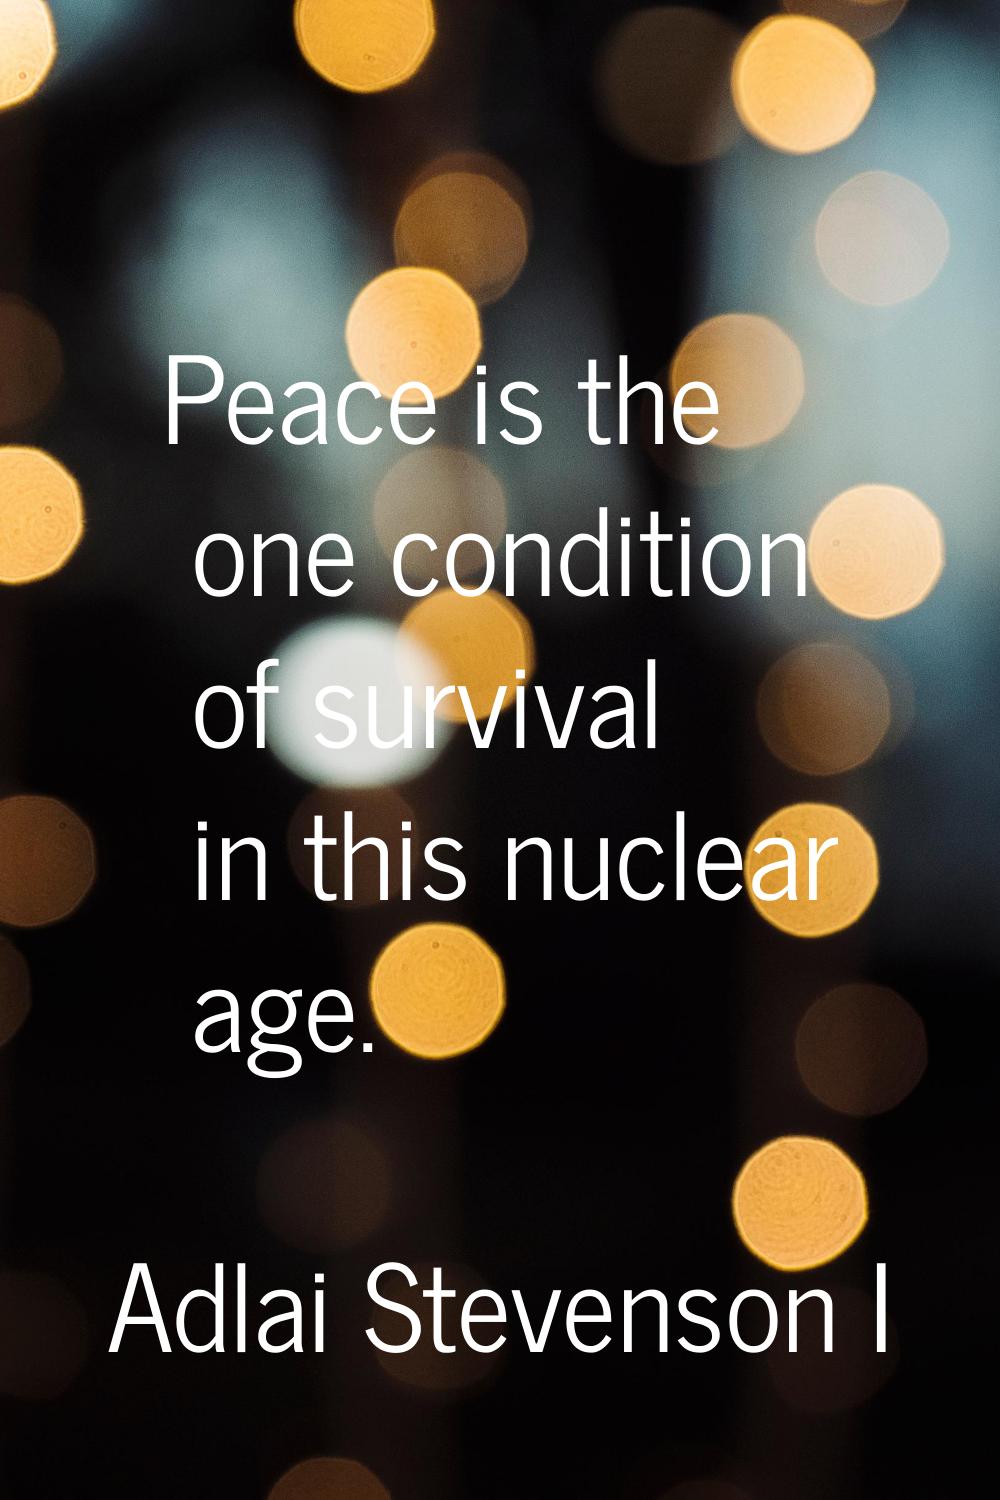 Peace is the one condition of survival in this nuclear age.